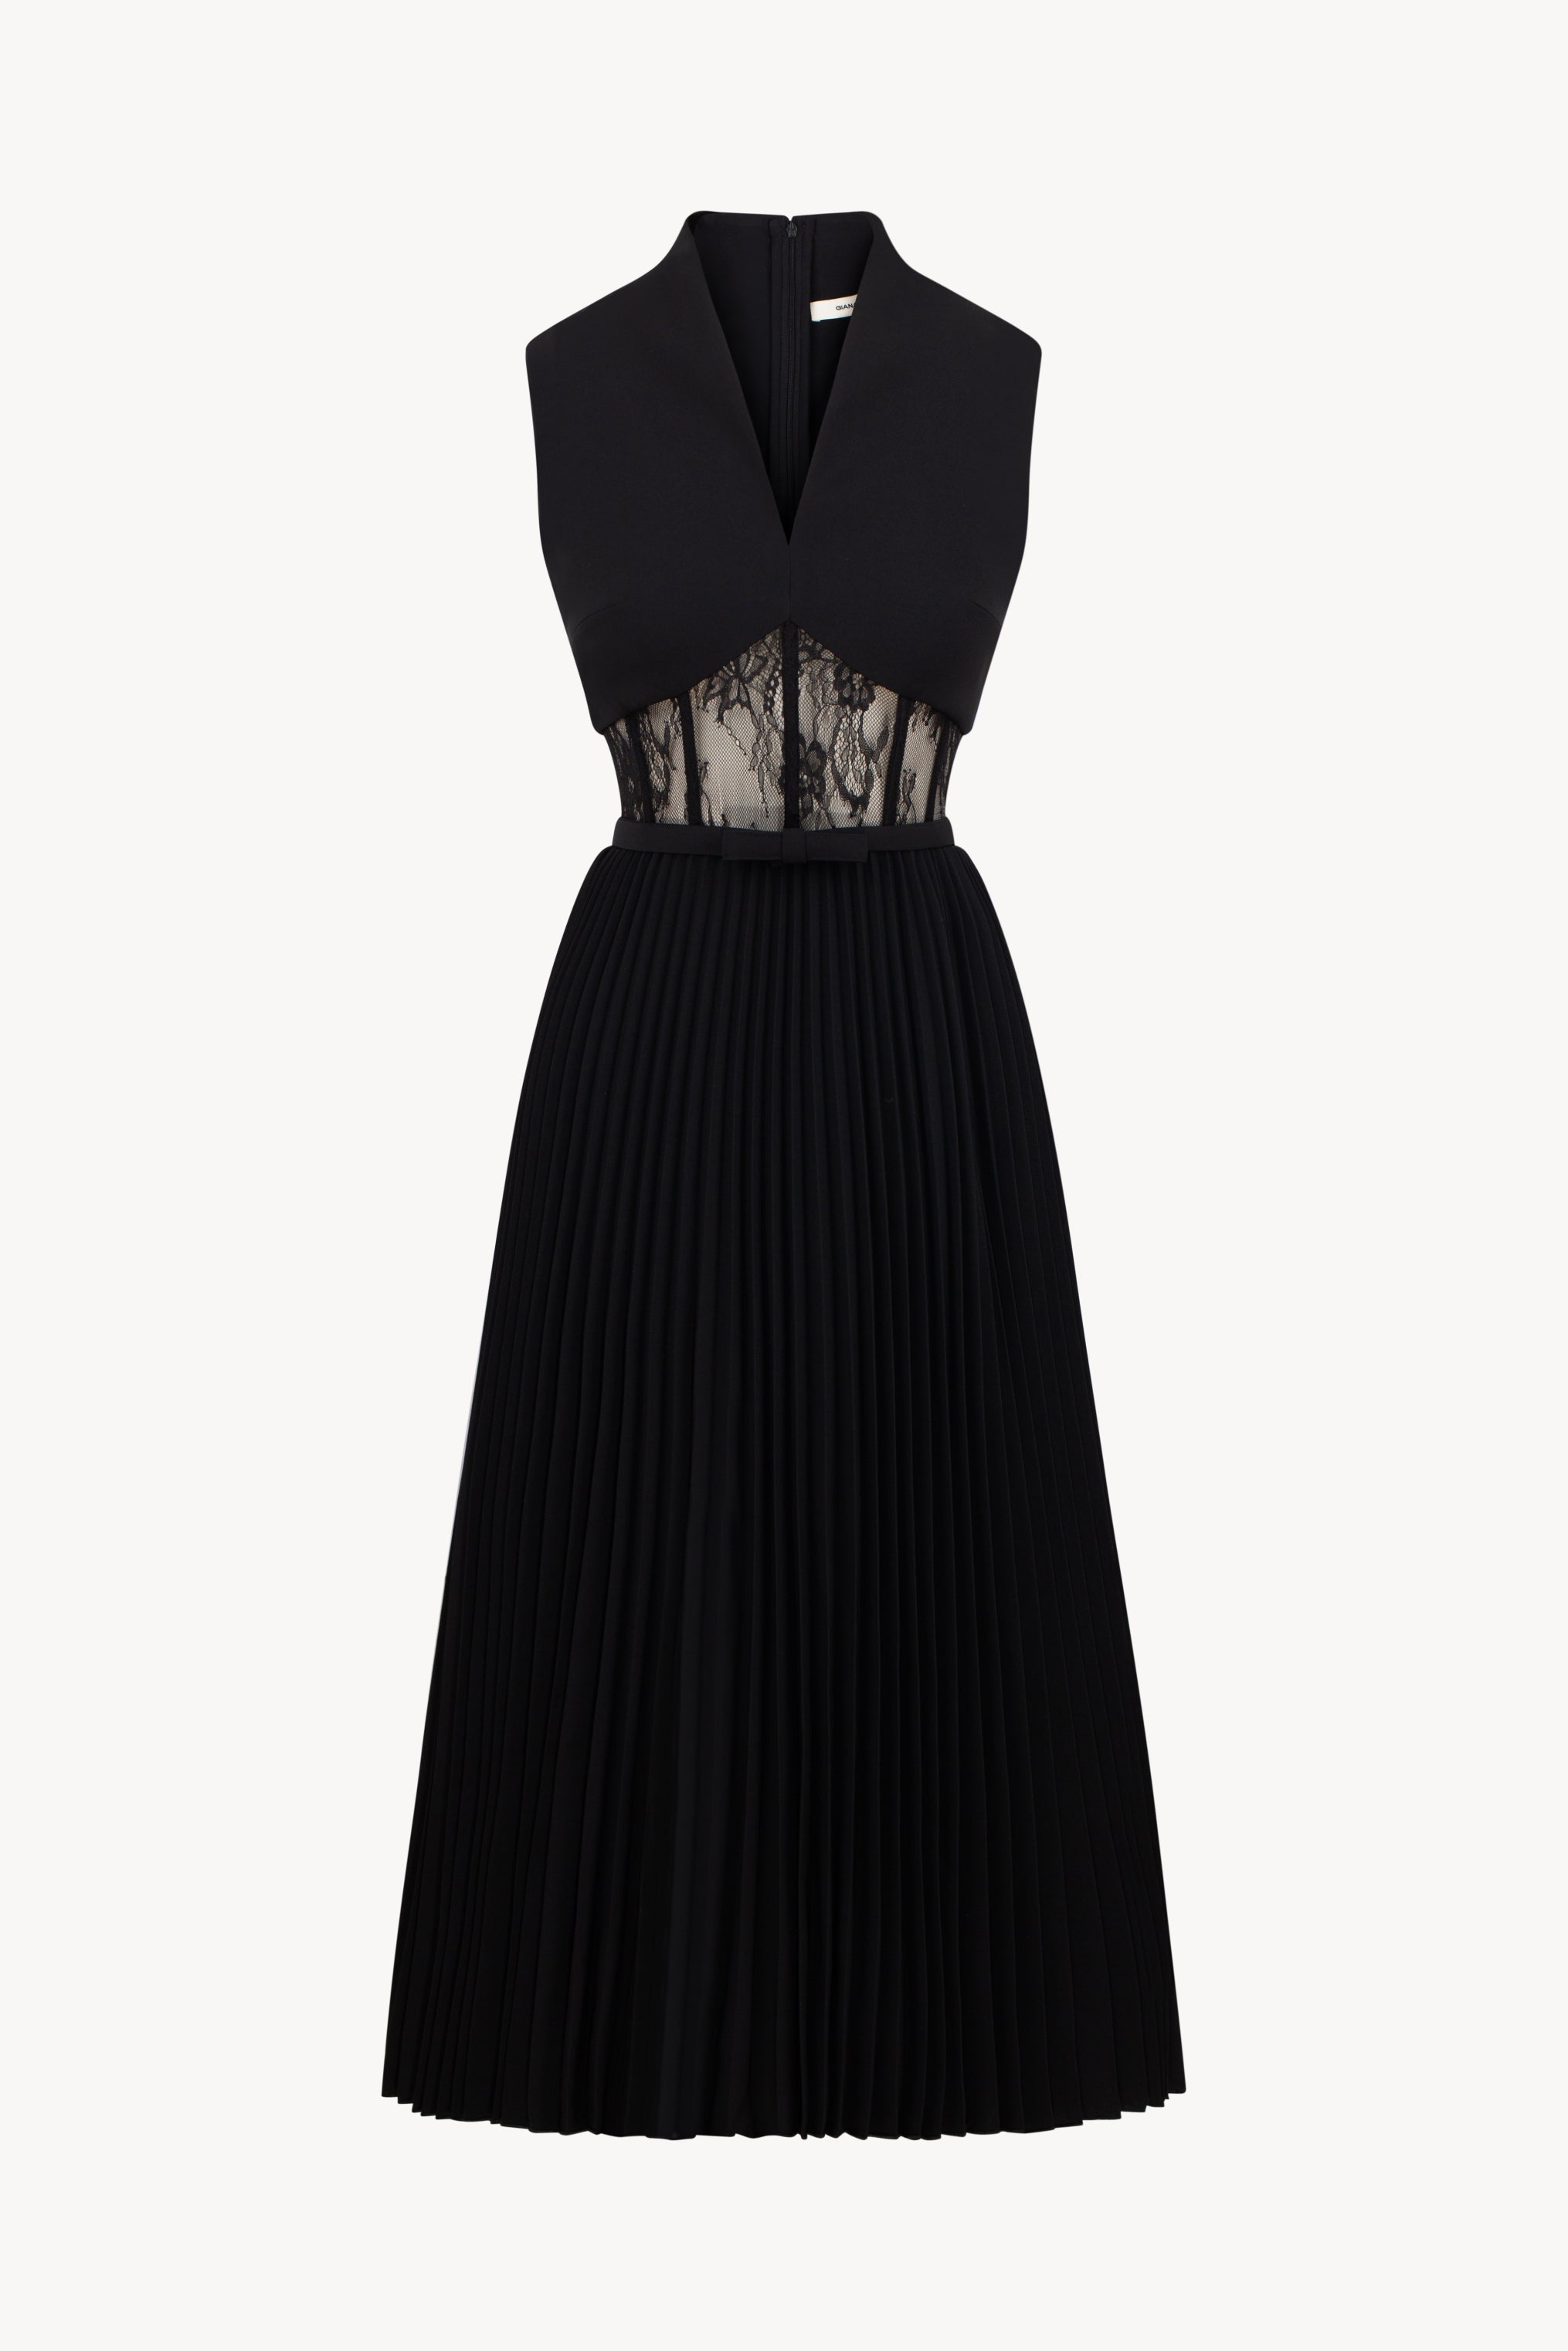 LUDOVIC Pleated Midi Dress with Lace